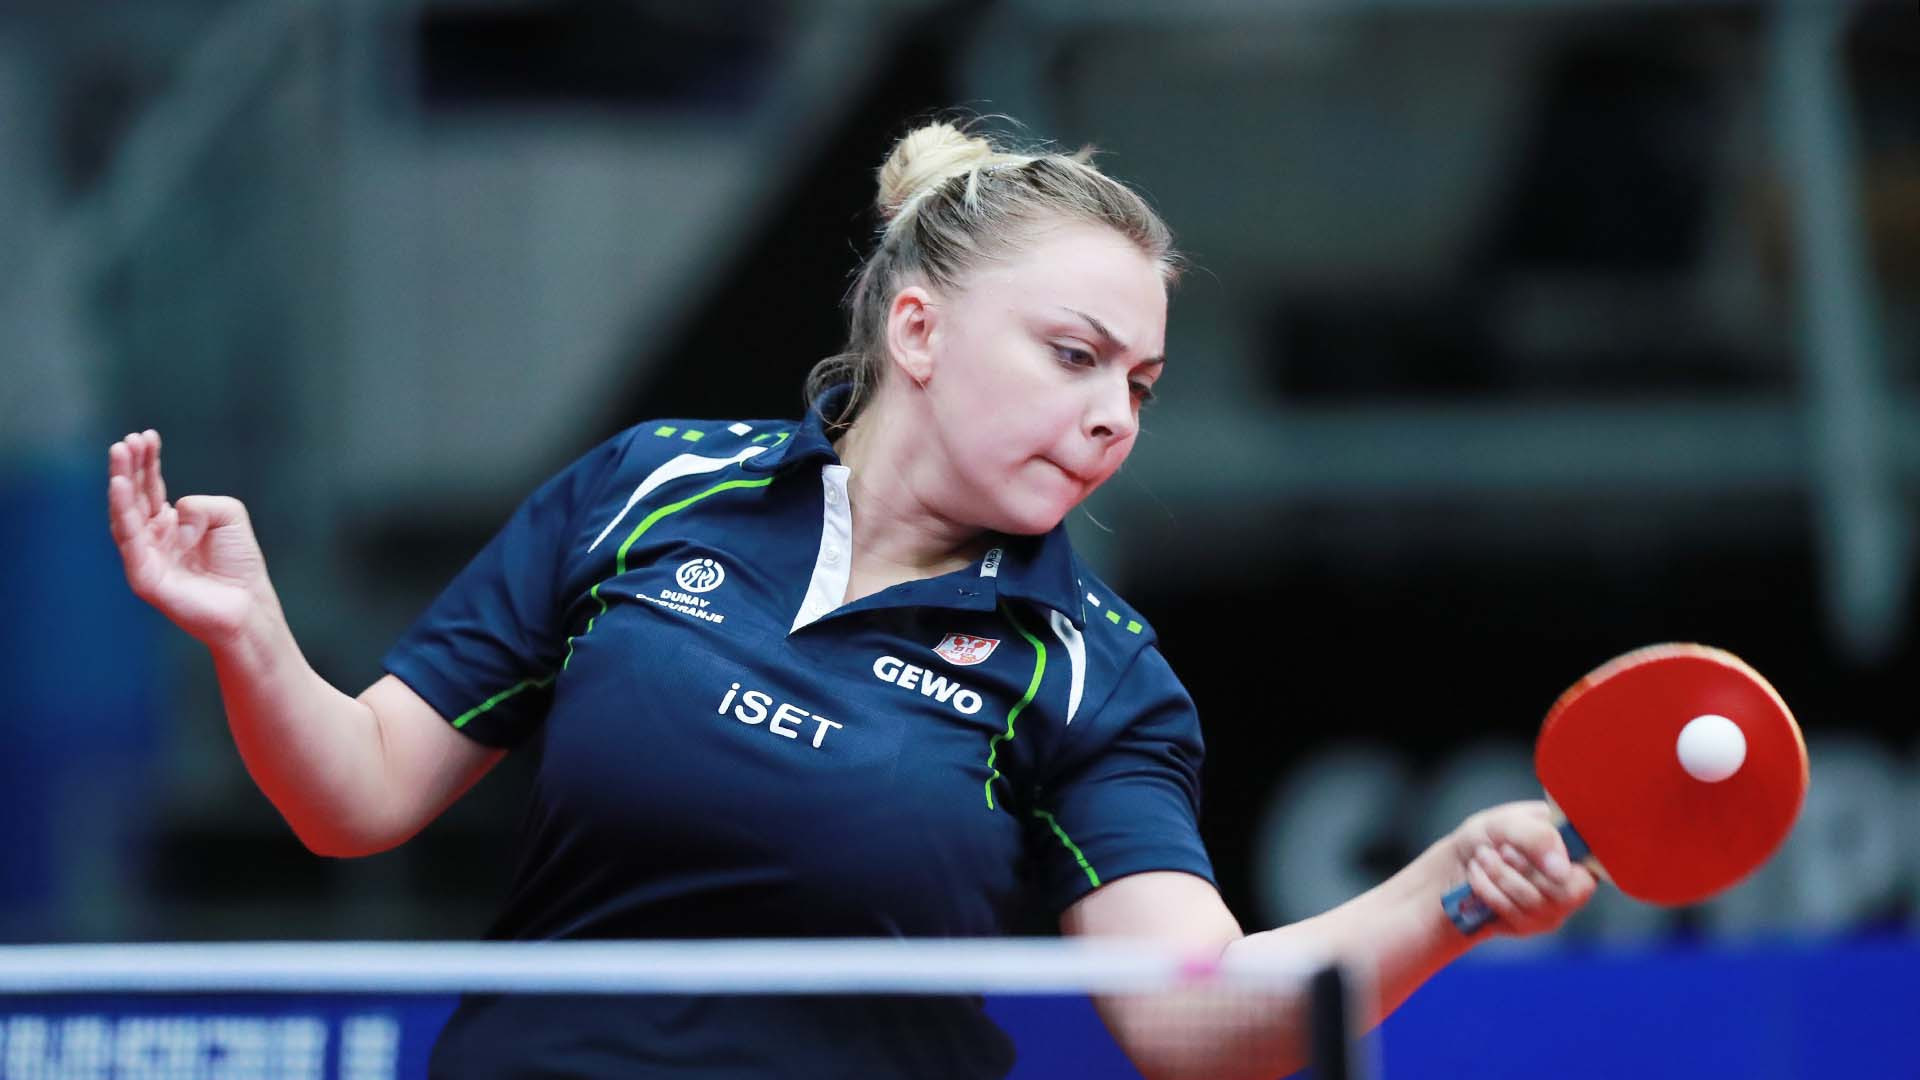 Serbian teenager Sabina Surjan caused the day's biggest upset in the women's singles event ©ITTF